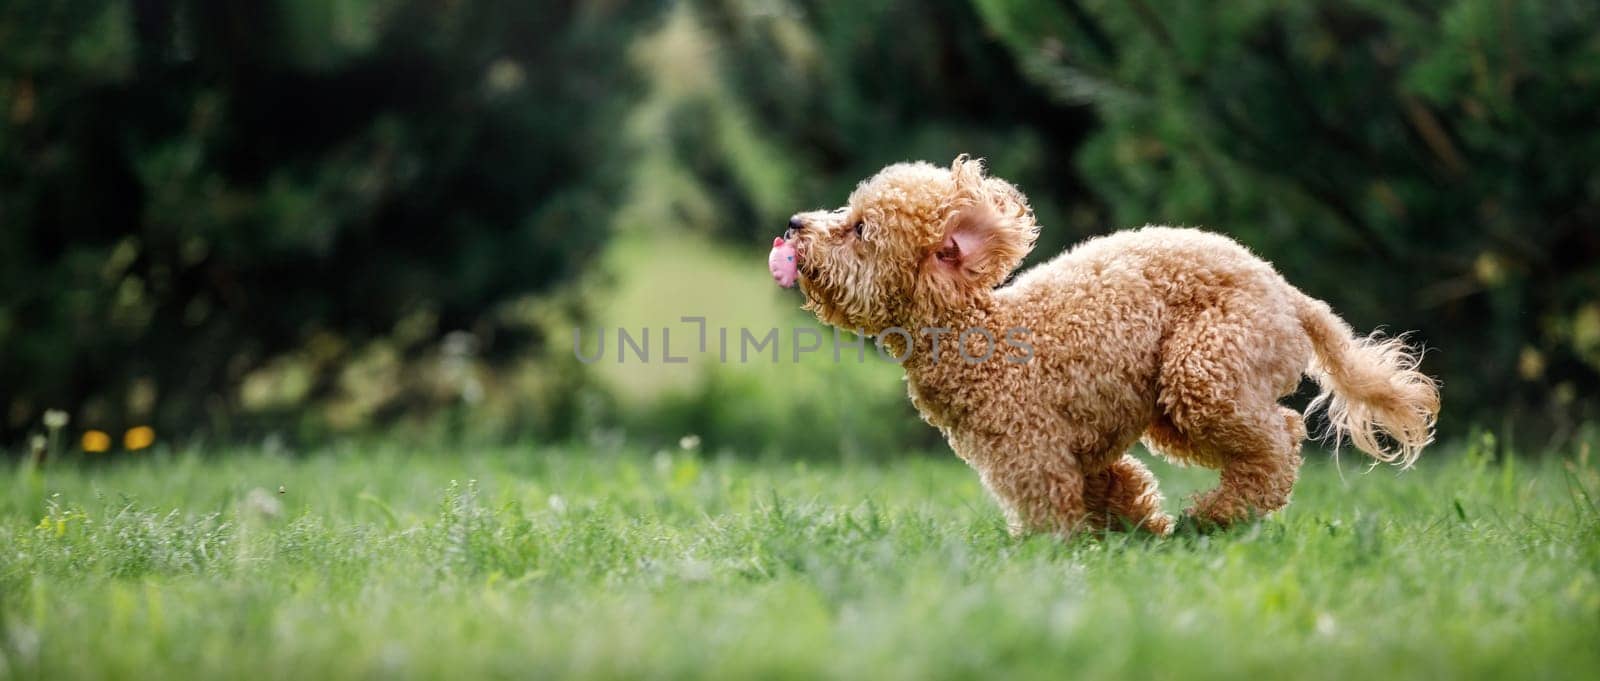 Little dog poodle flying fast on the grass. The dog bites a pink rubber toy. A panoramic photo suitable for a banner has free space for text.